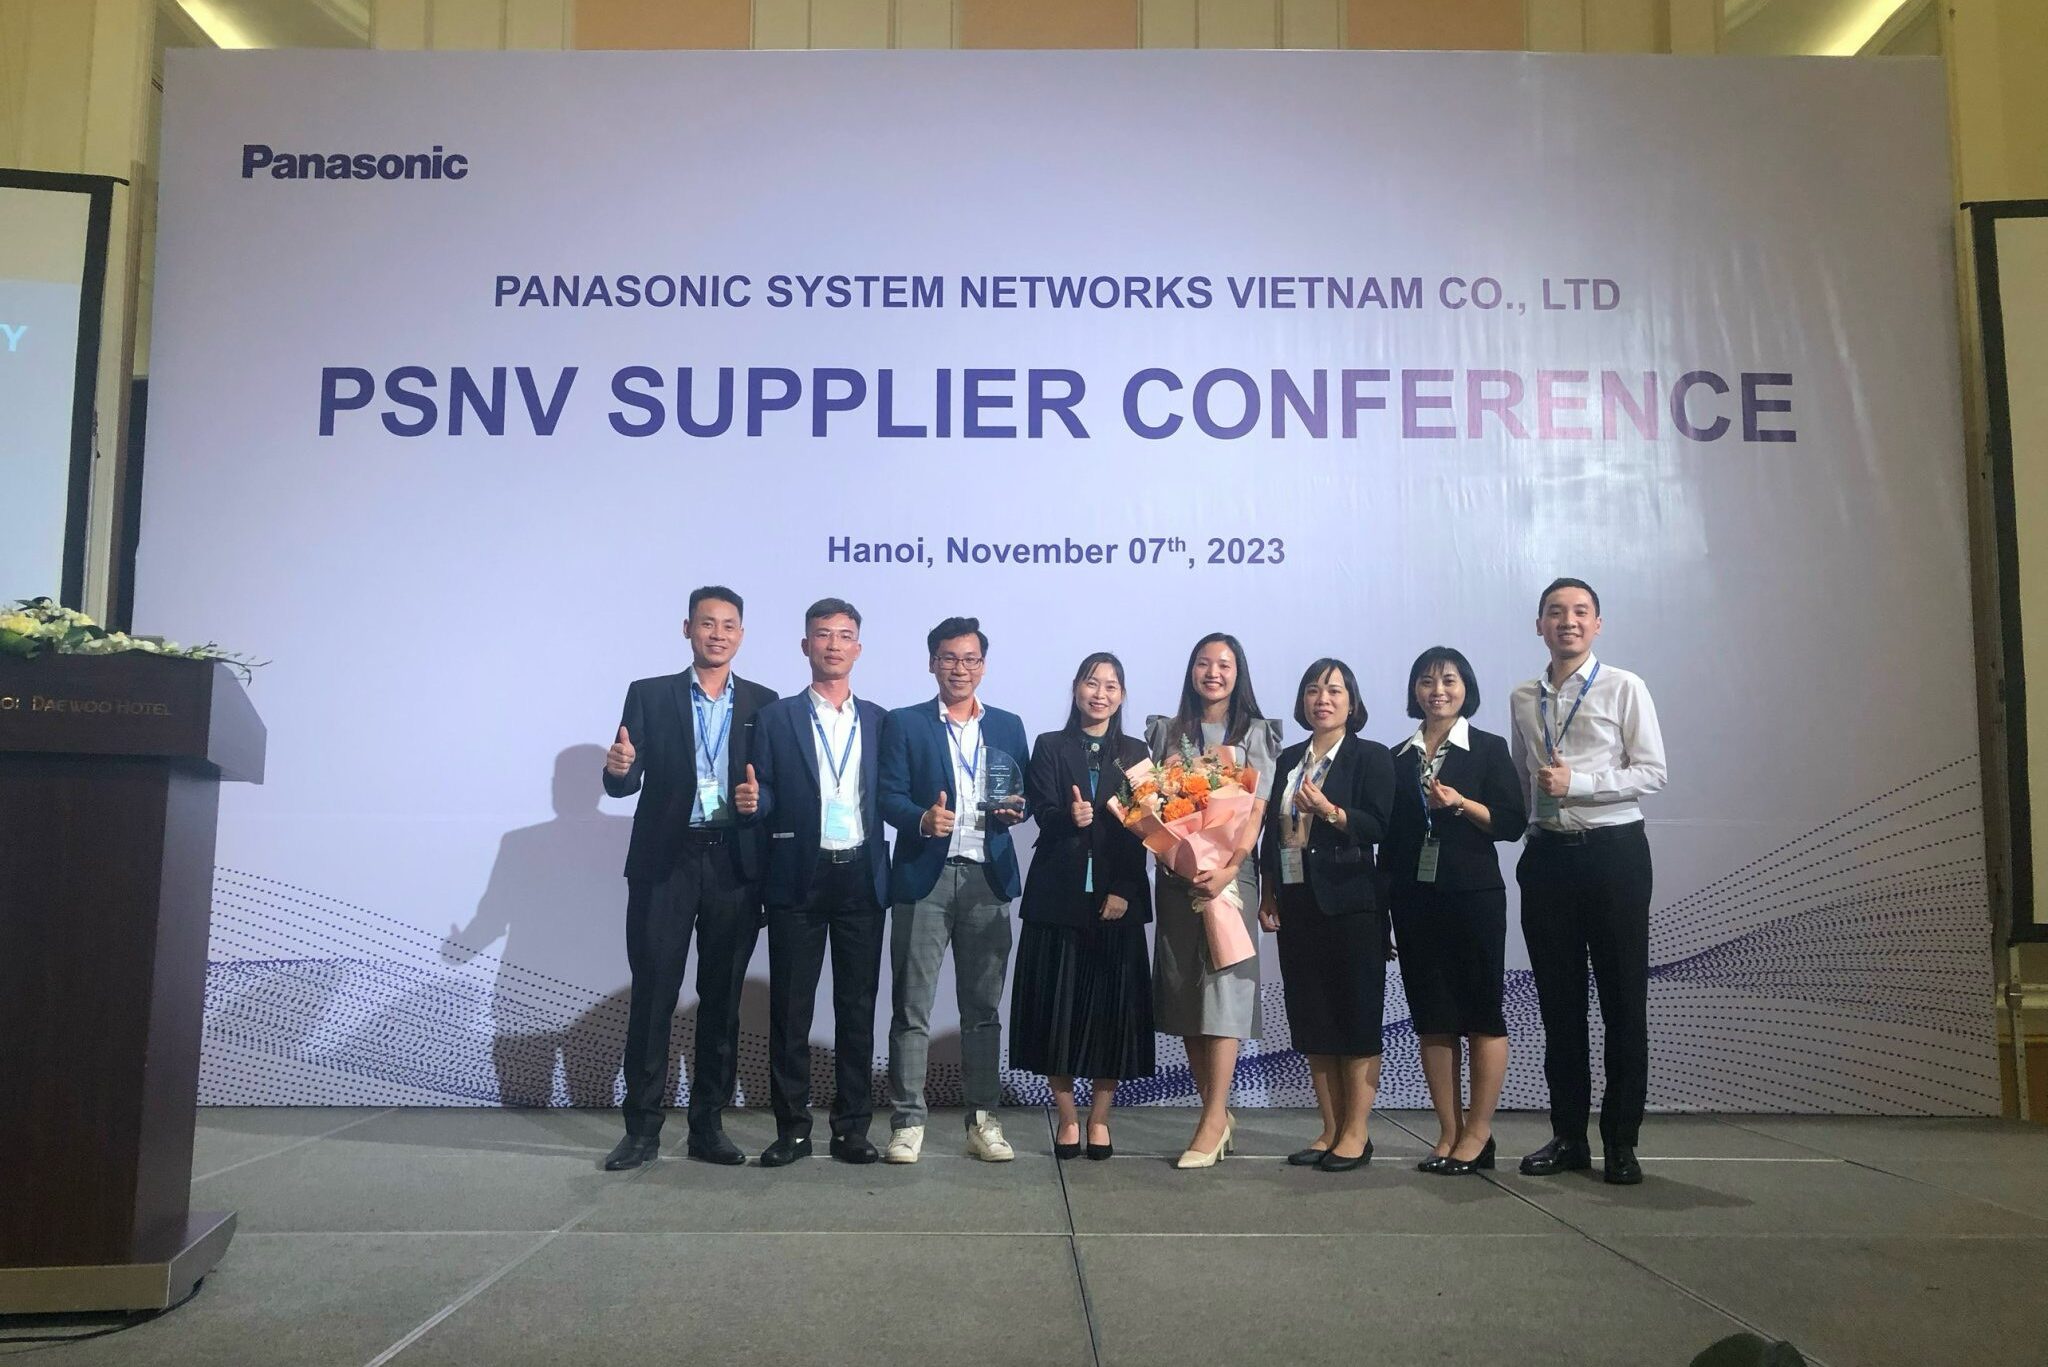 CNCTech Thang Long was honored to be awarded the Best Supplier Award by PSNV 2023